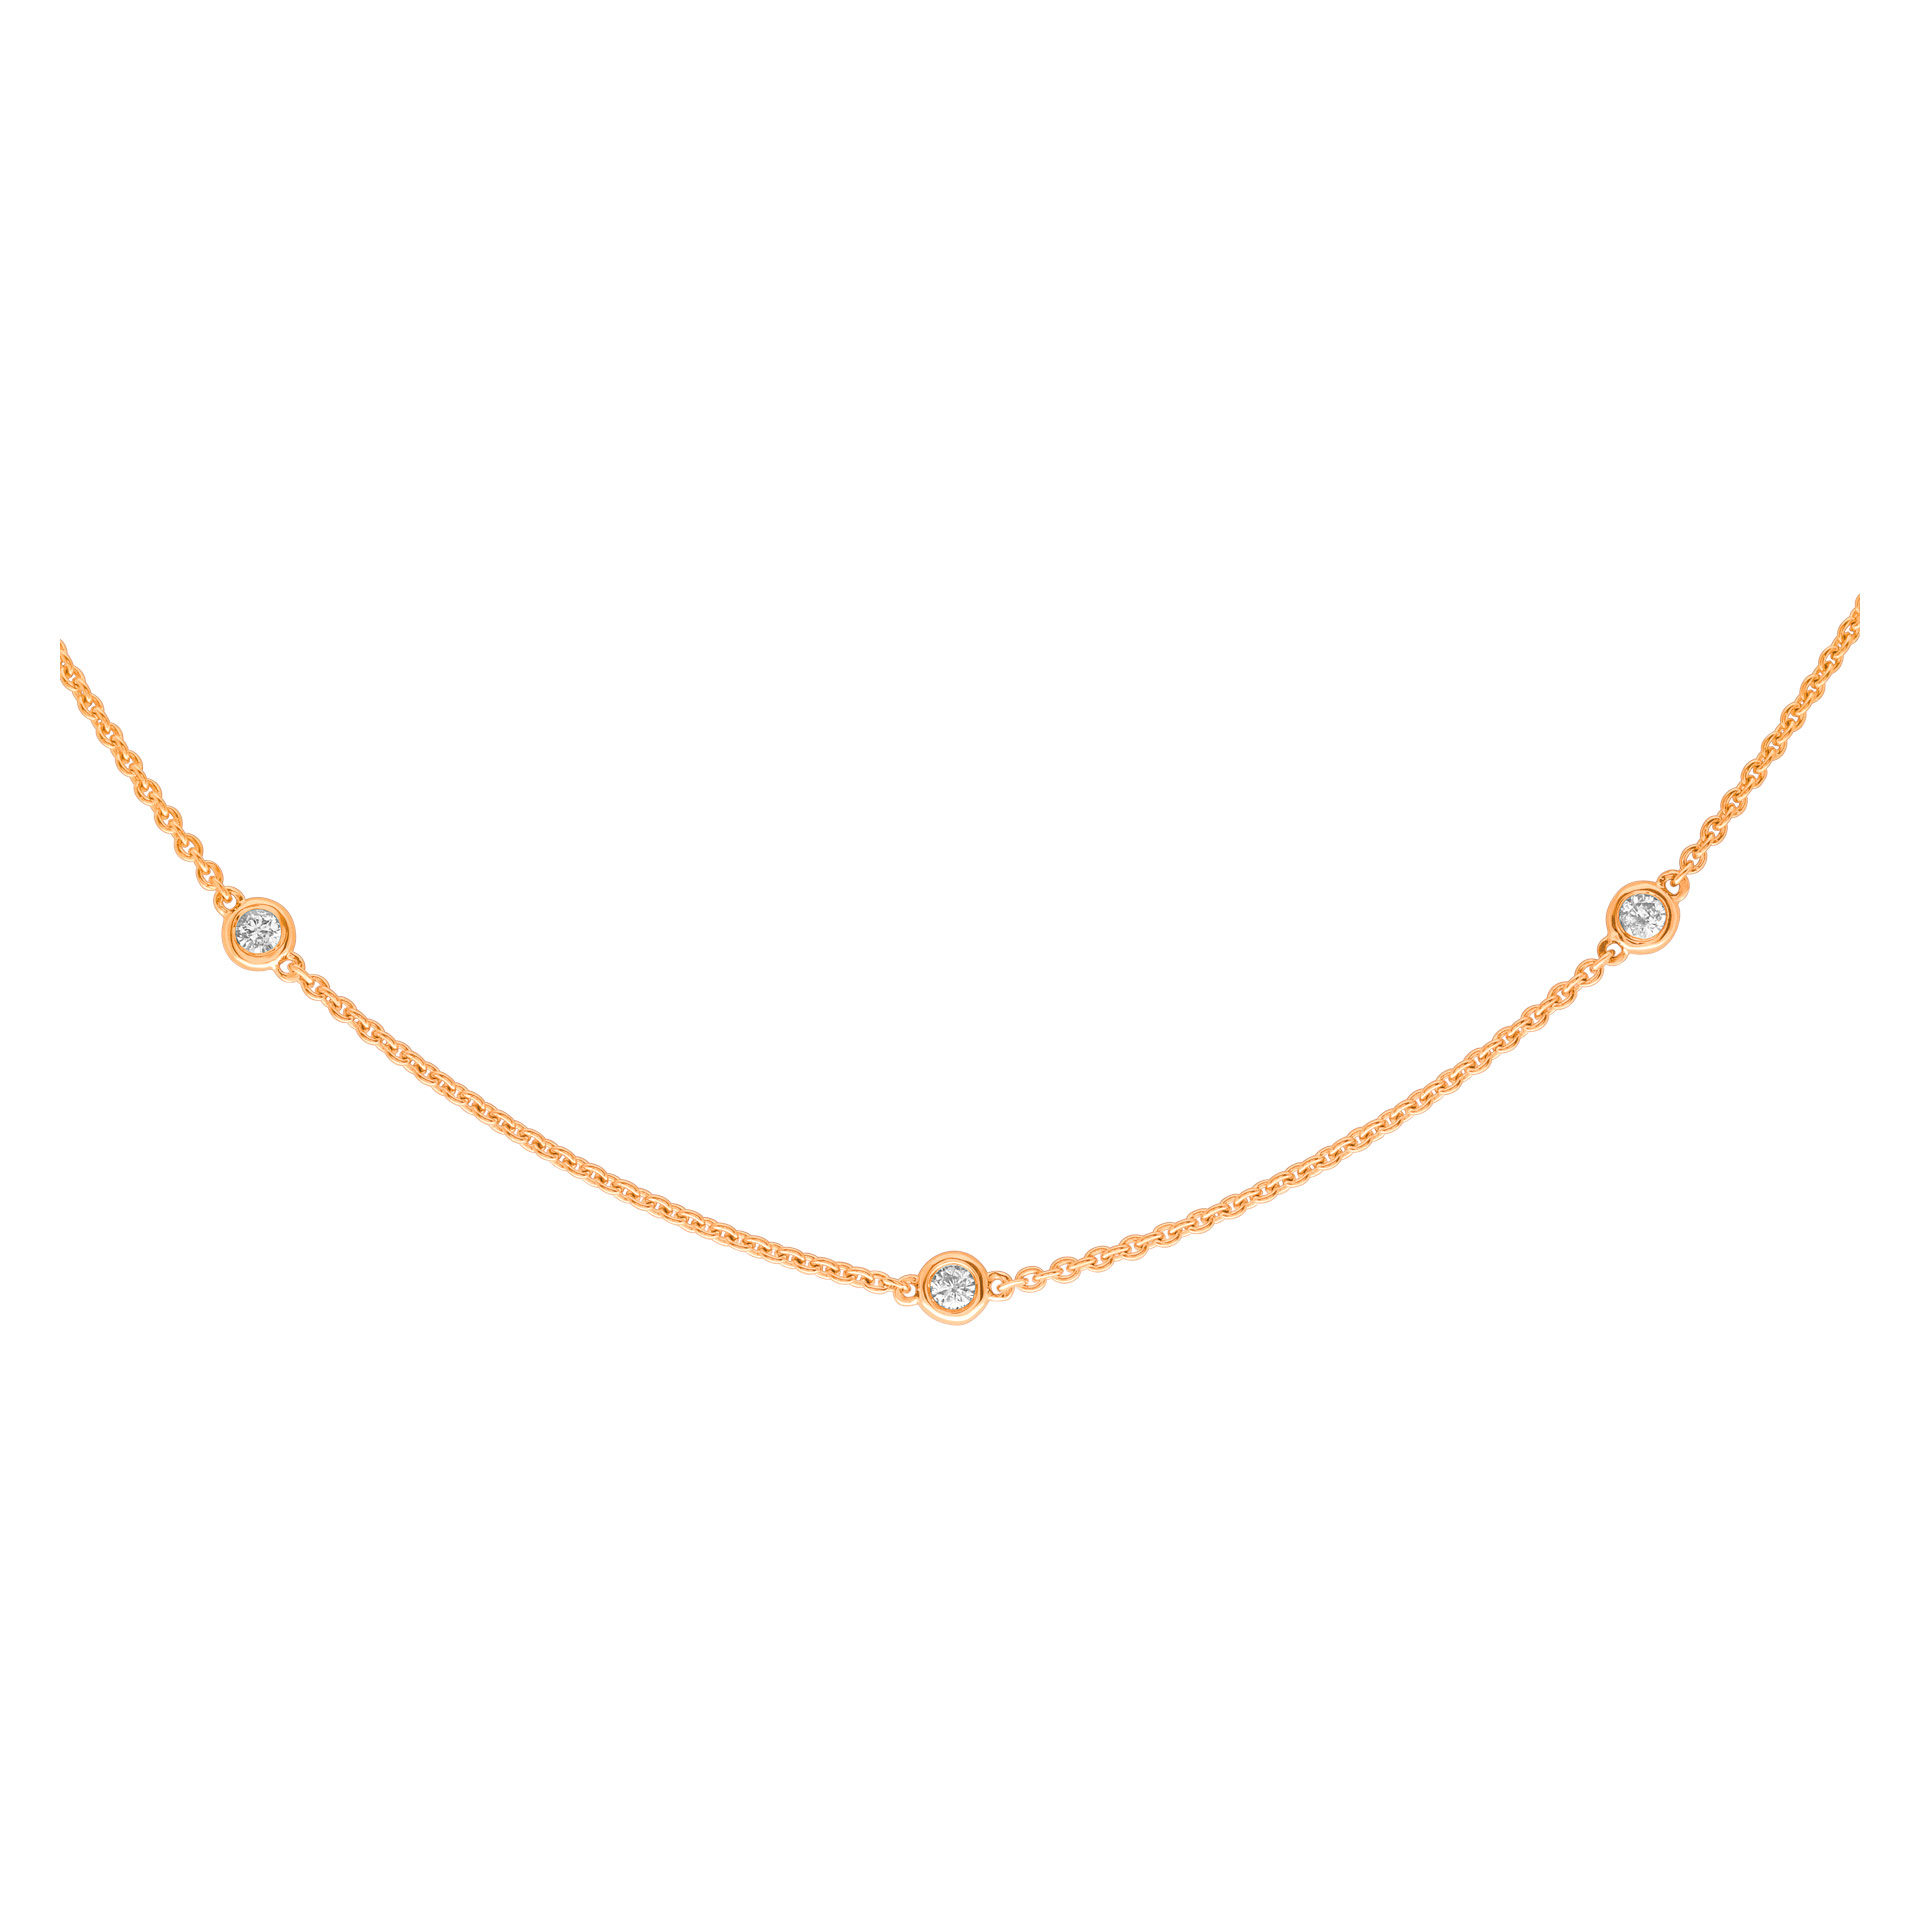 Diamonds by the yard 14k rose gold 1.05 cts in diamonds